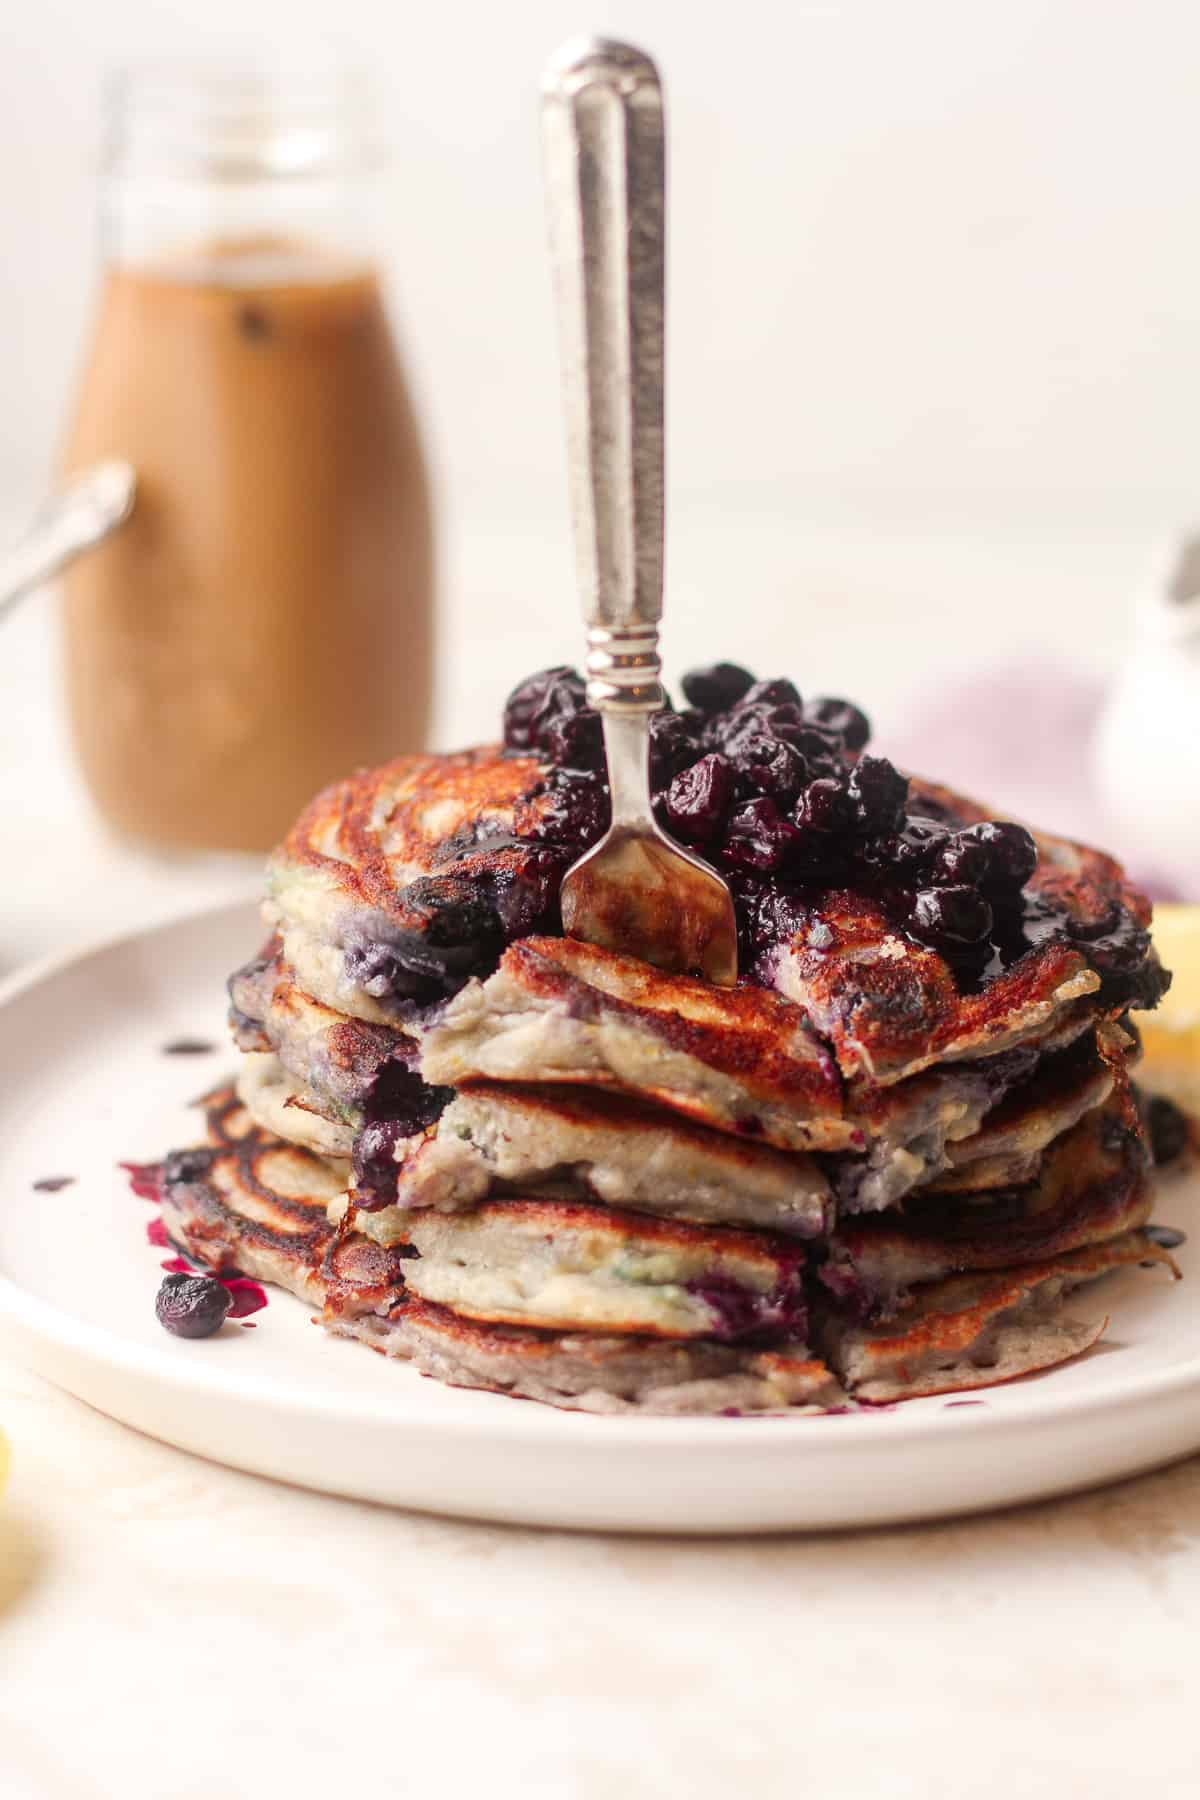 A fork stabbed into a stack of pancakes with blueberry compote on top.